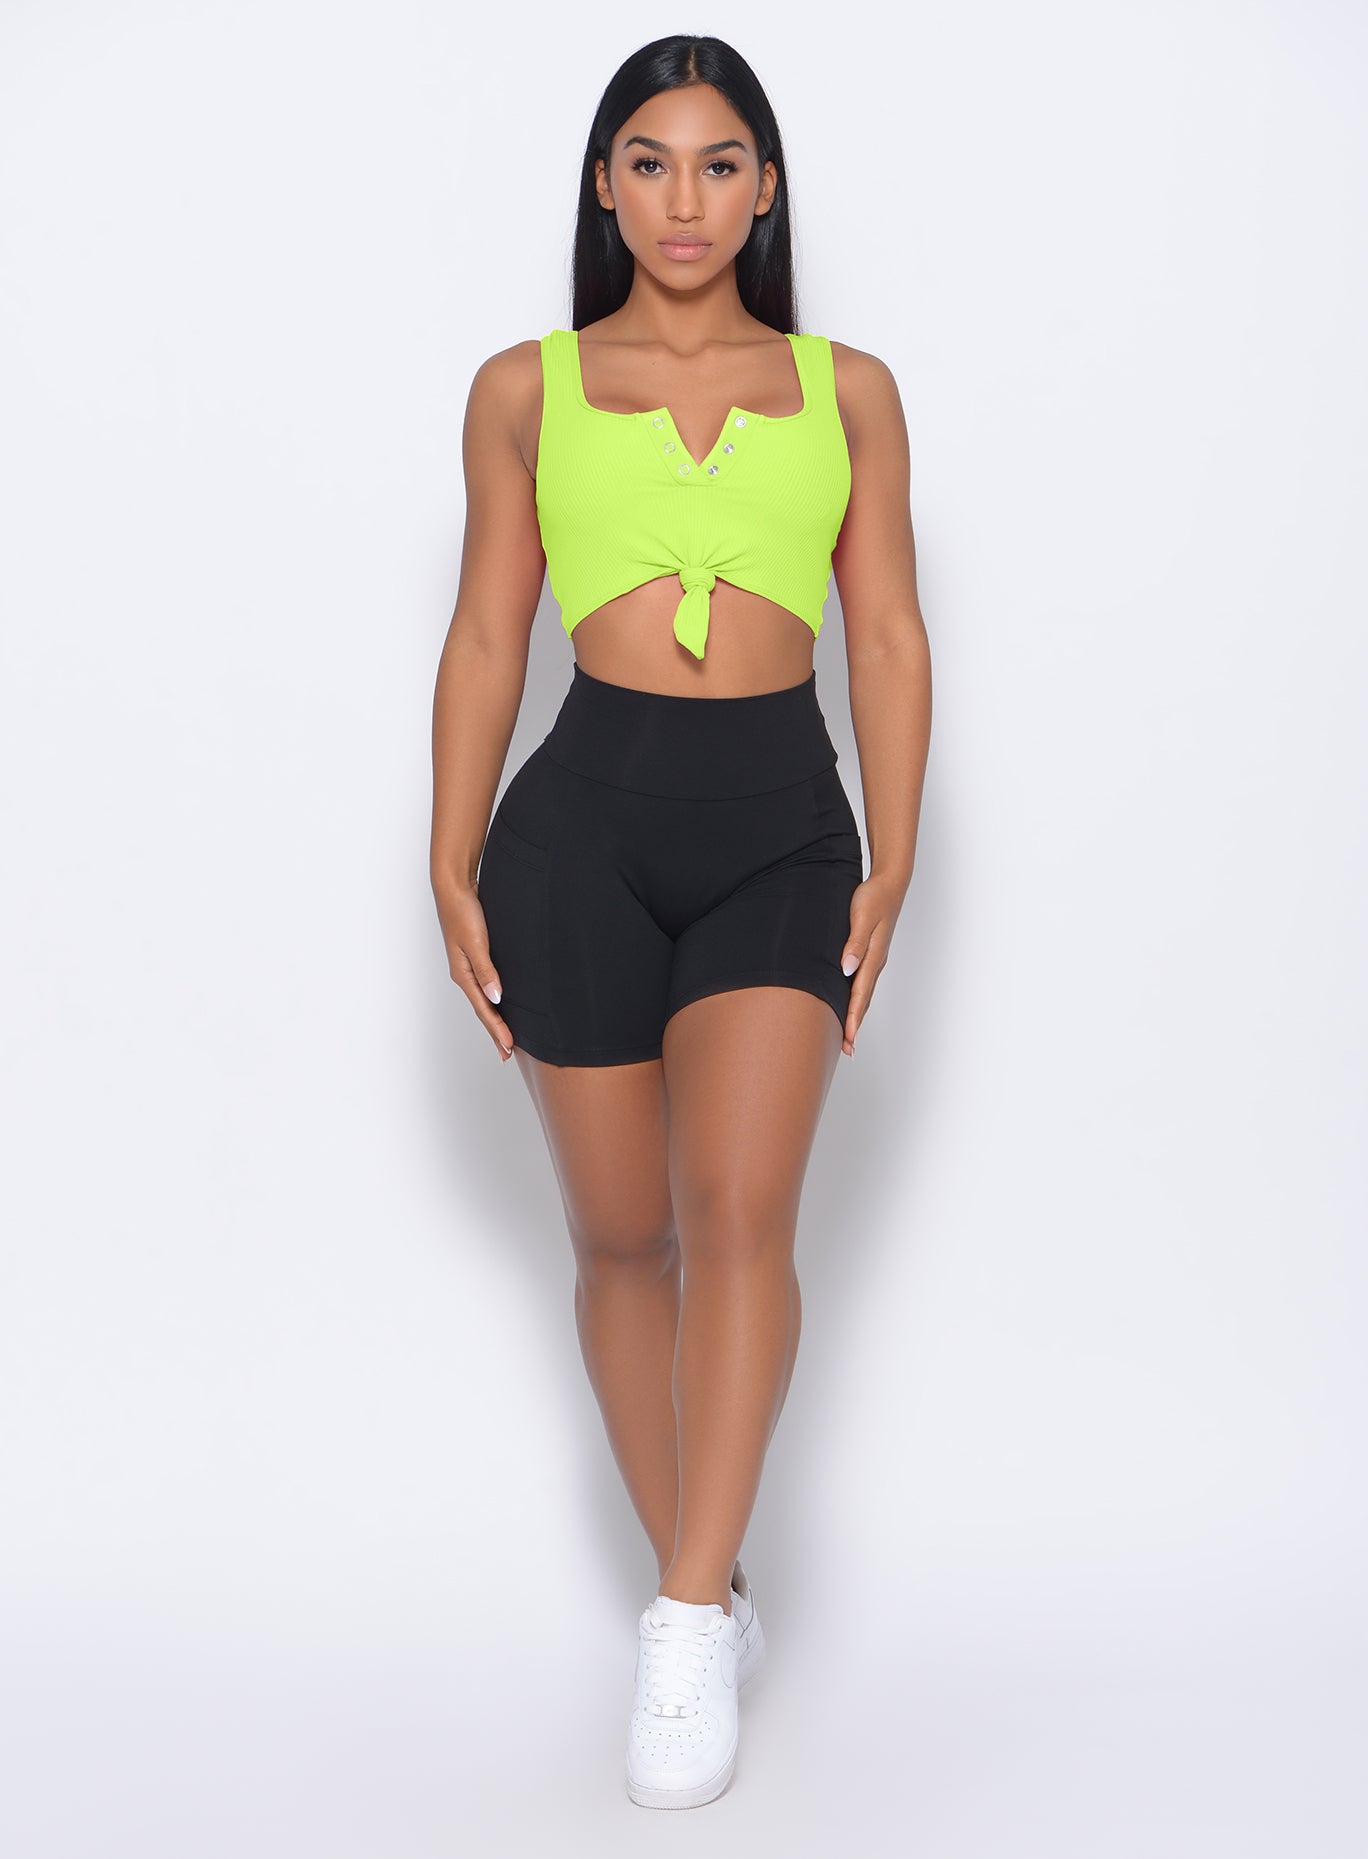 Model facing forward wearing our henley sports bra in neon yellow and a black shorts